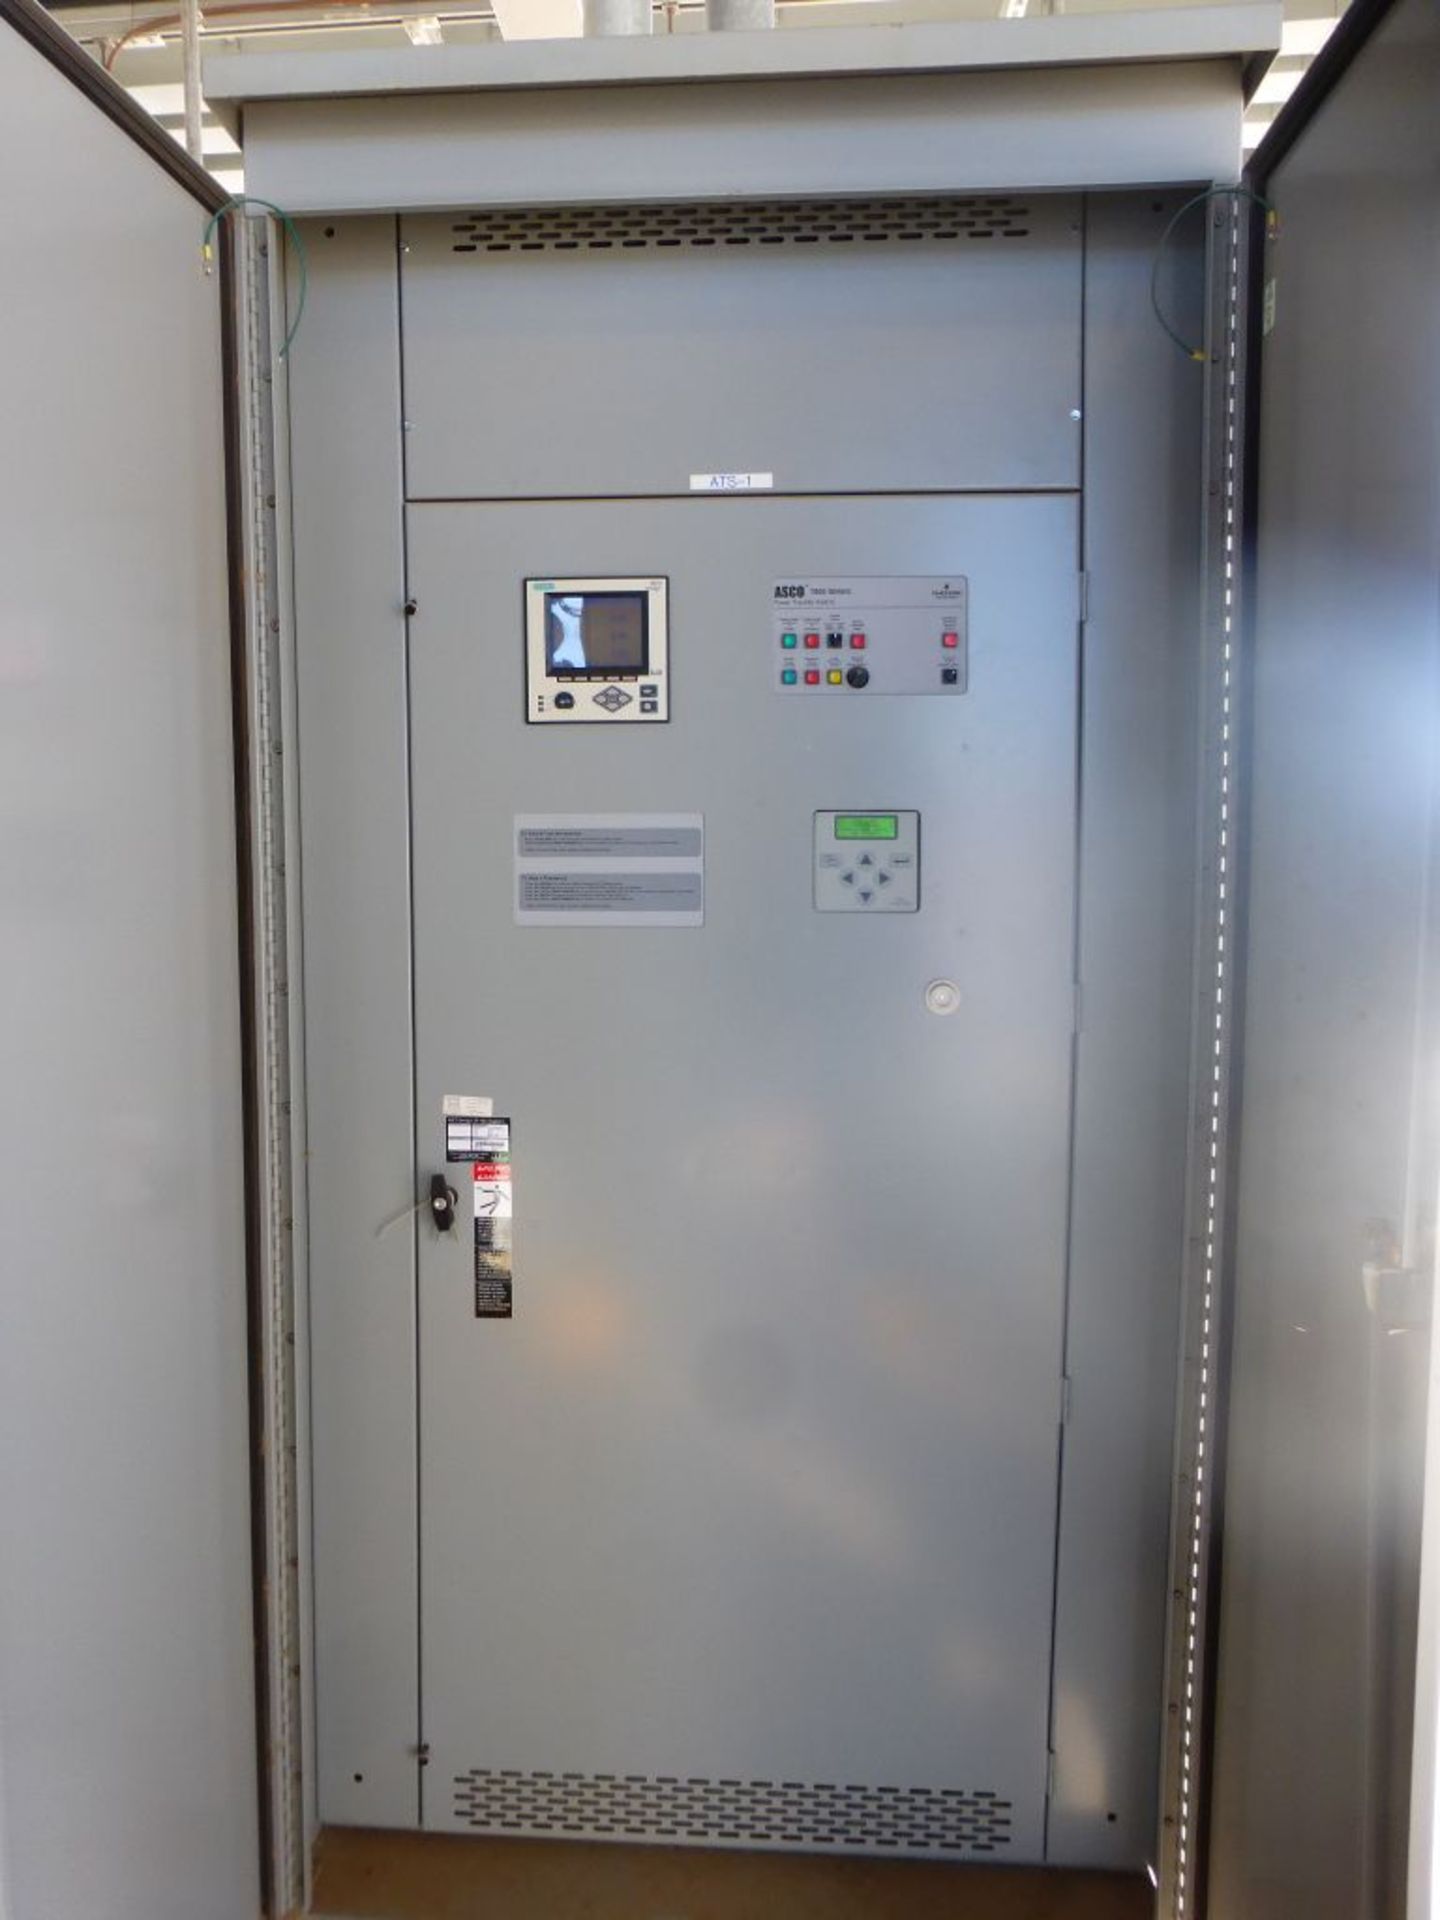 ASCO 7000 Series Power Transfer Switch | Lot Loading Fee: $50 | 800A; 480V; Tag: 233640 - Image 4 of 12